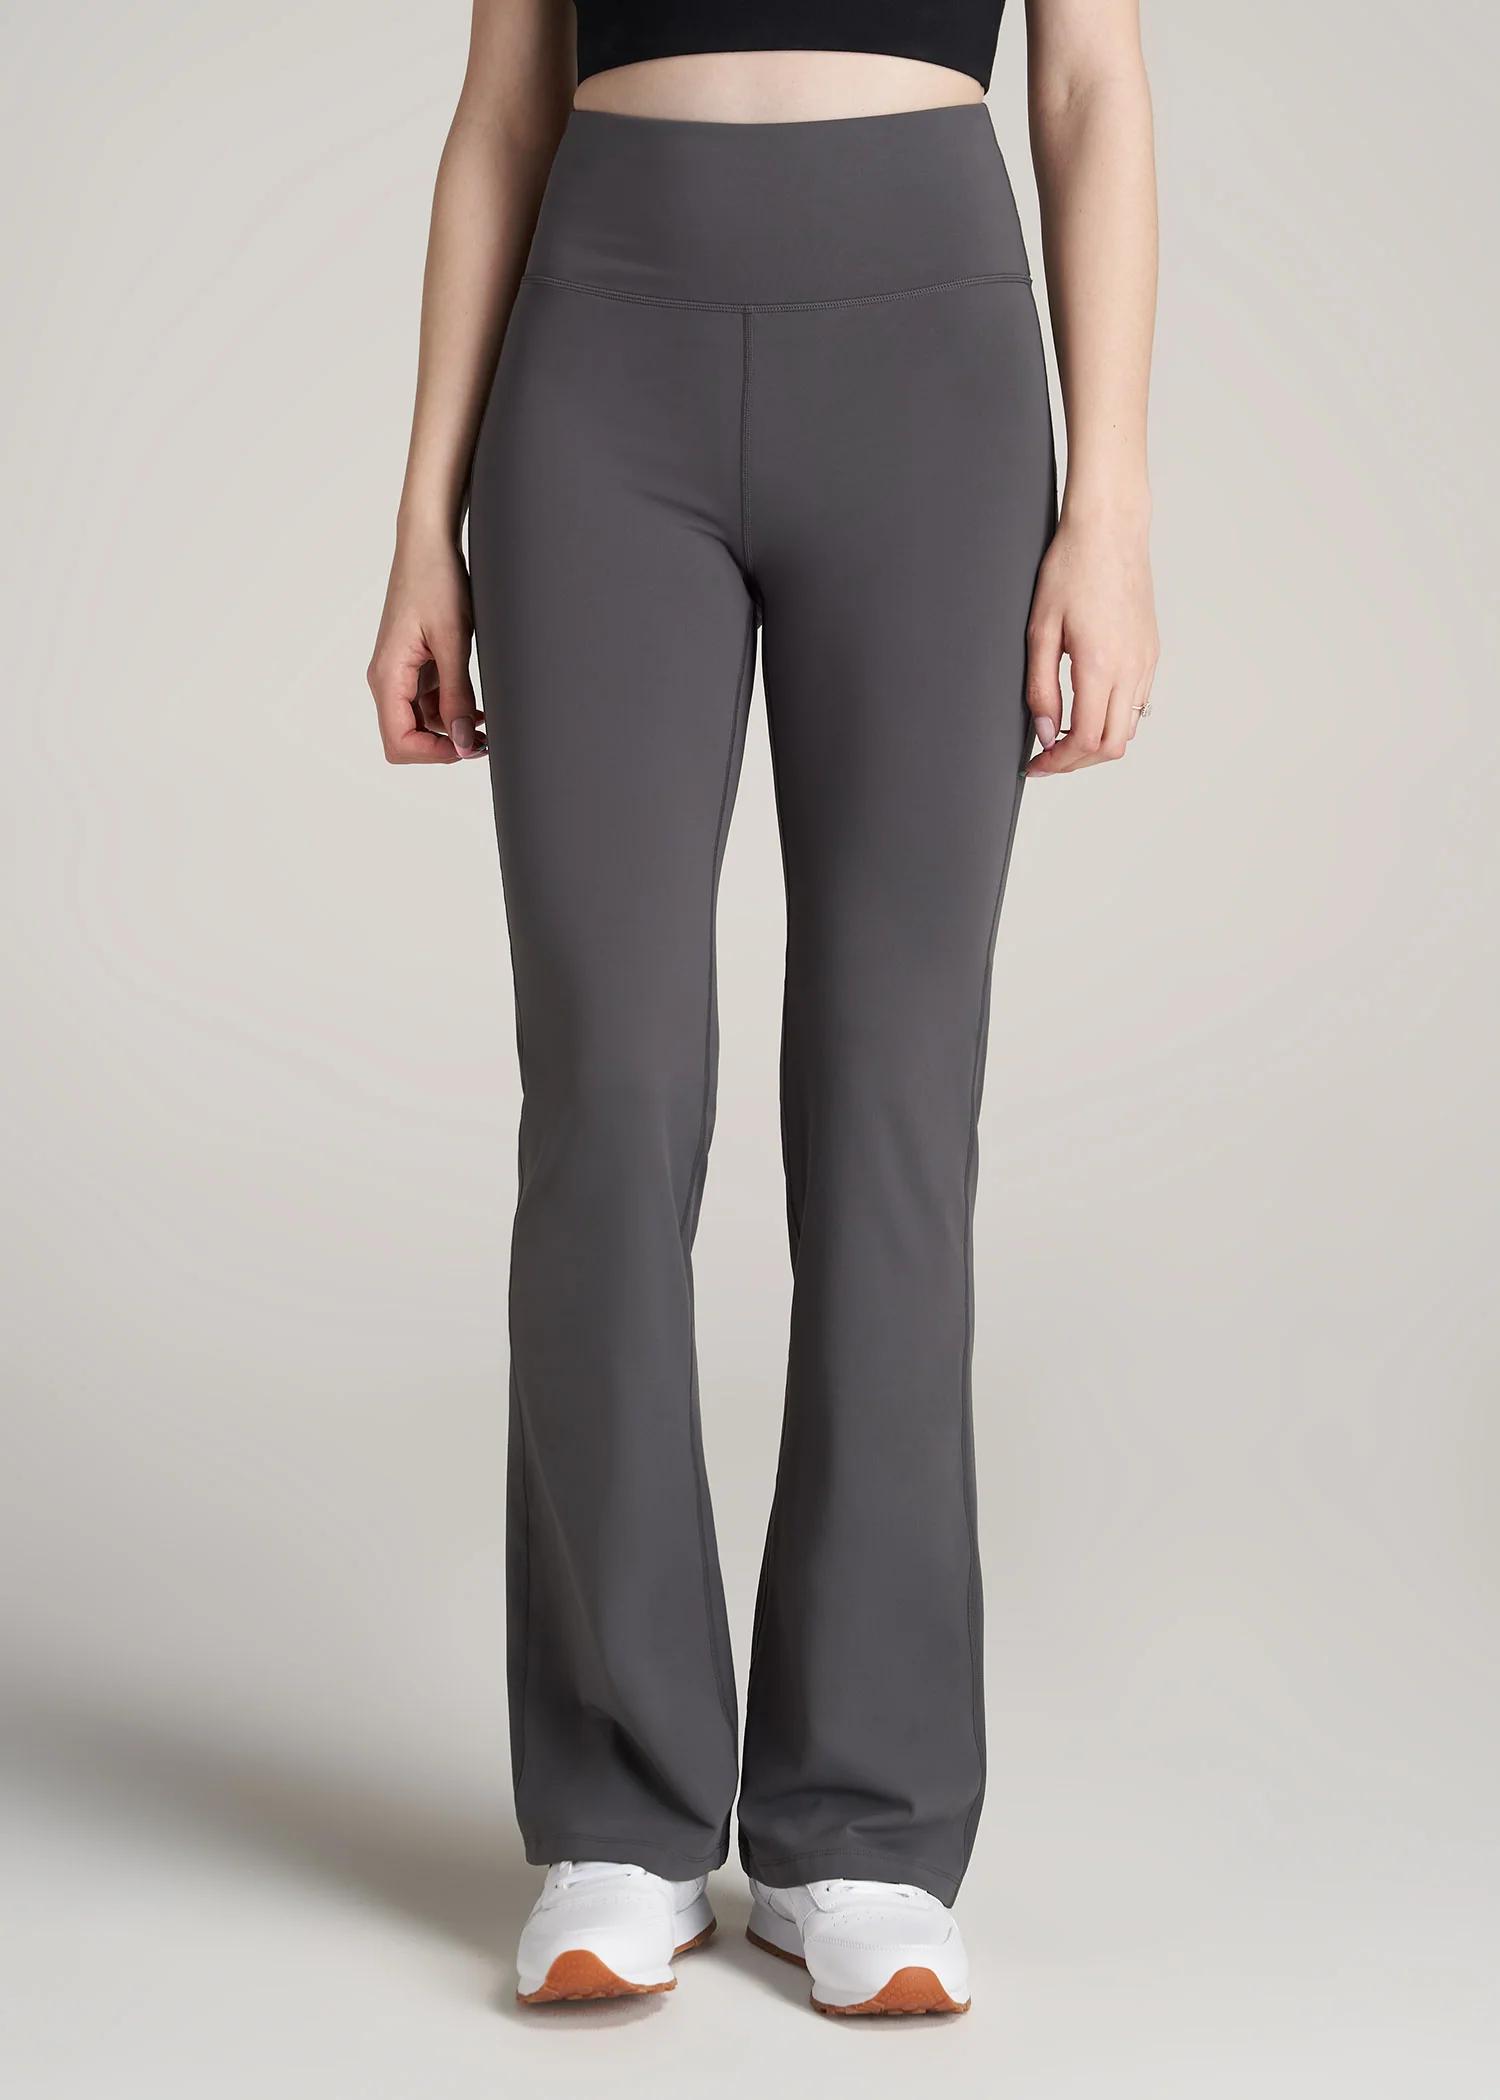 yoga trousers womens - What are yoga pants called now